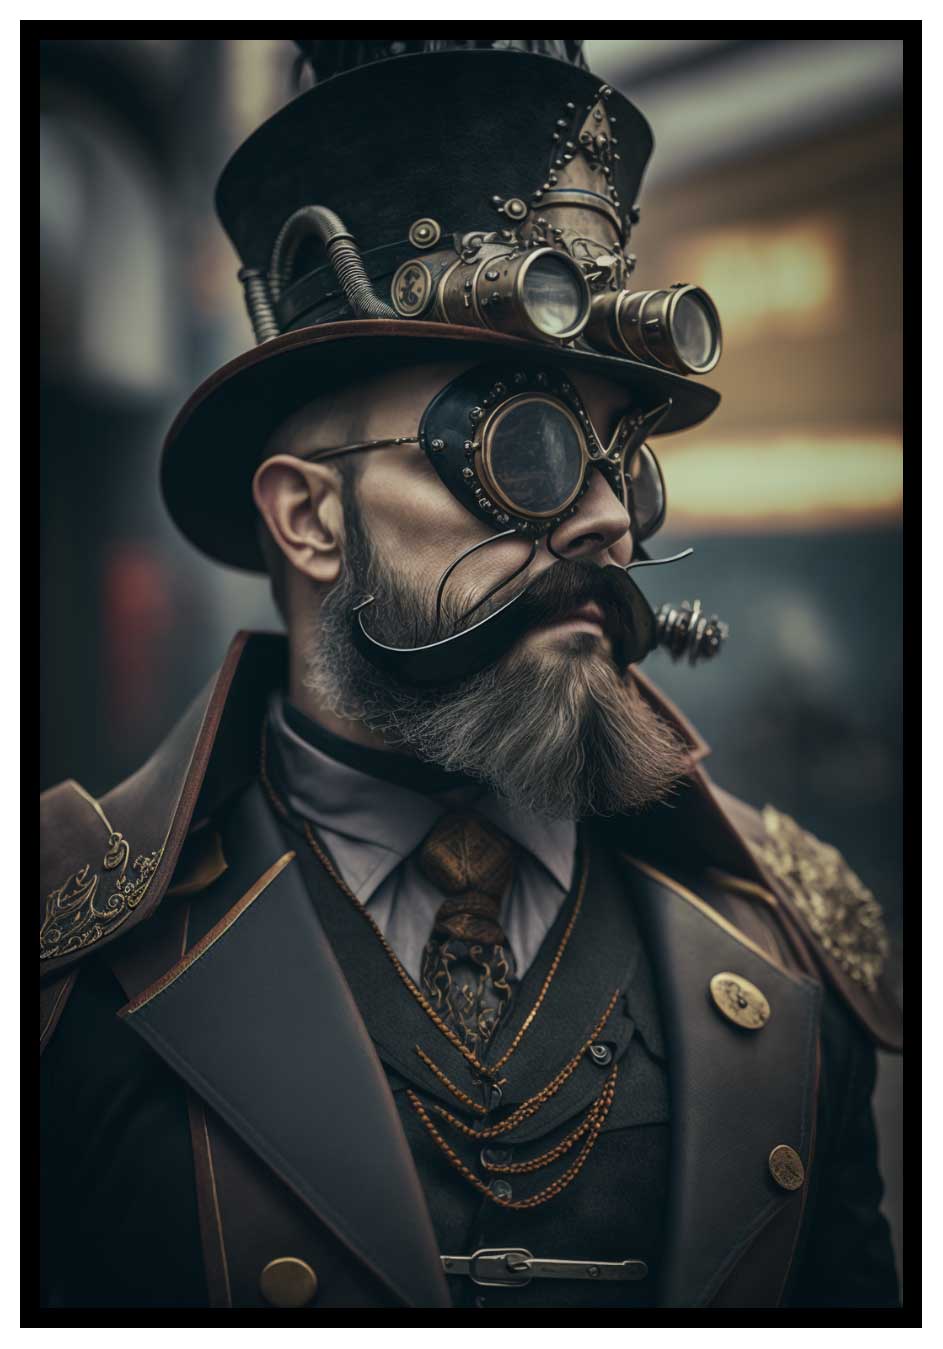 Steampunk 101: Mostly Everything You Need to Know About Steampunk - Joe  Latimer, A Creative Digital Media Artist